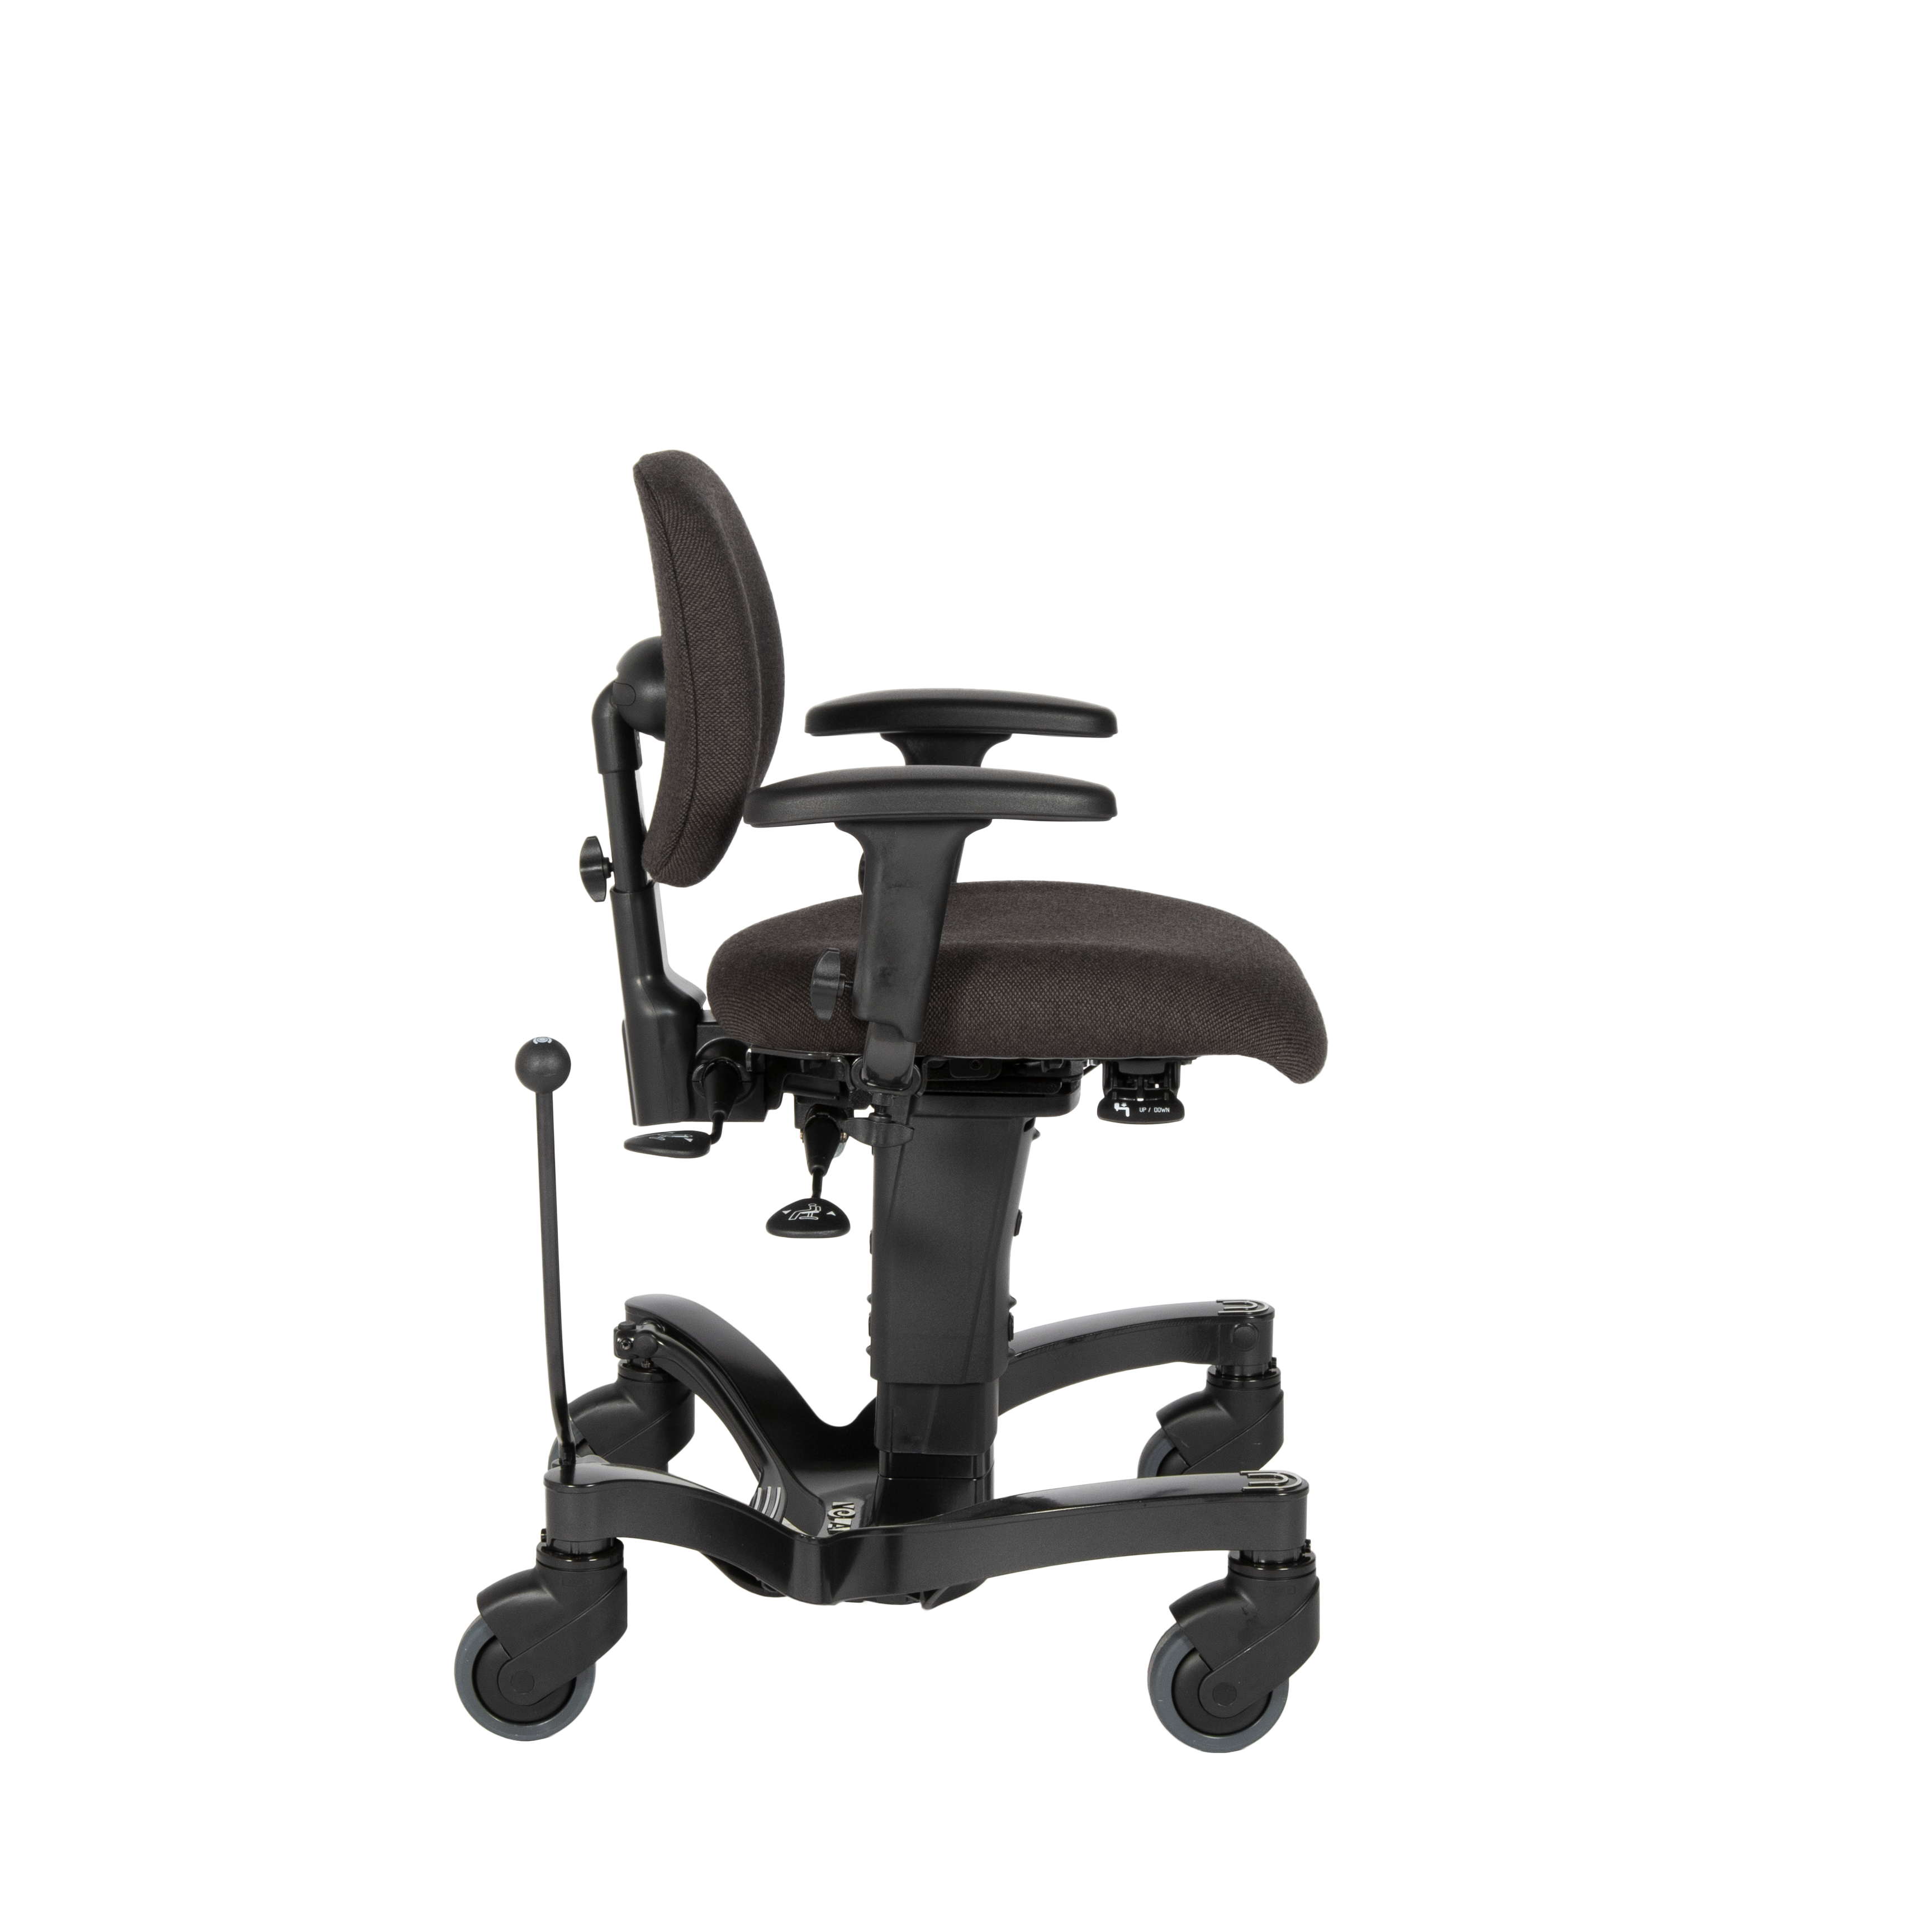 Vela tango 700 with active backrest in medium right image